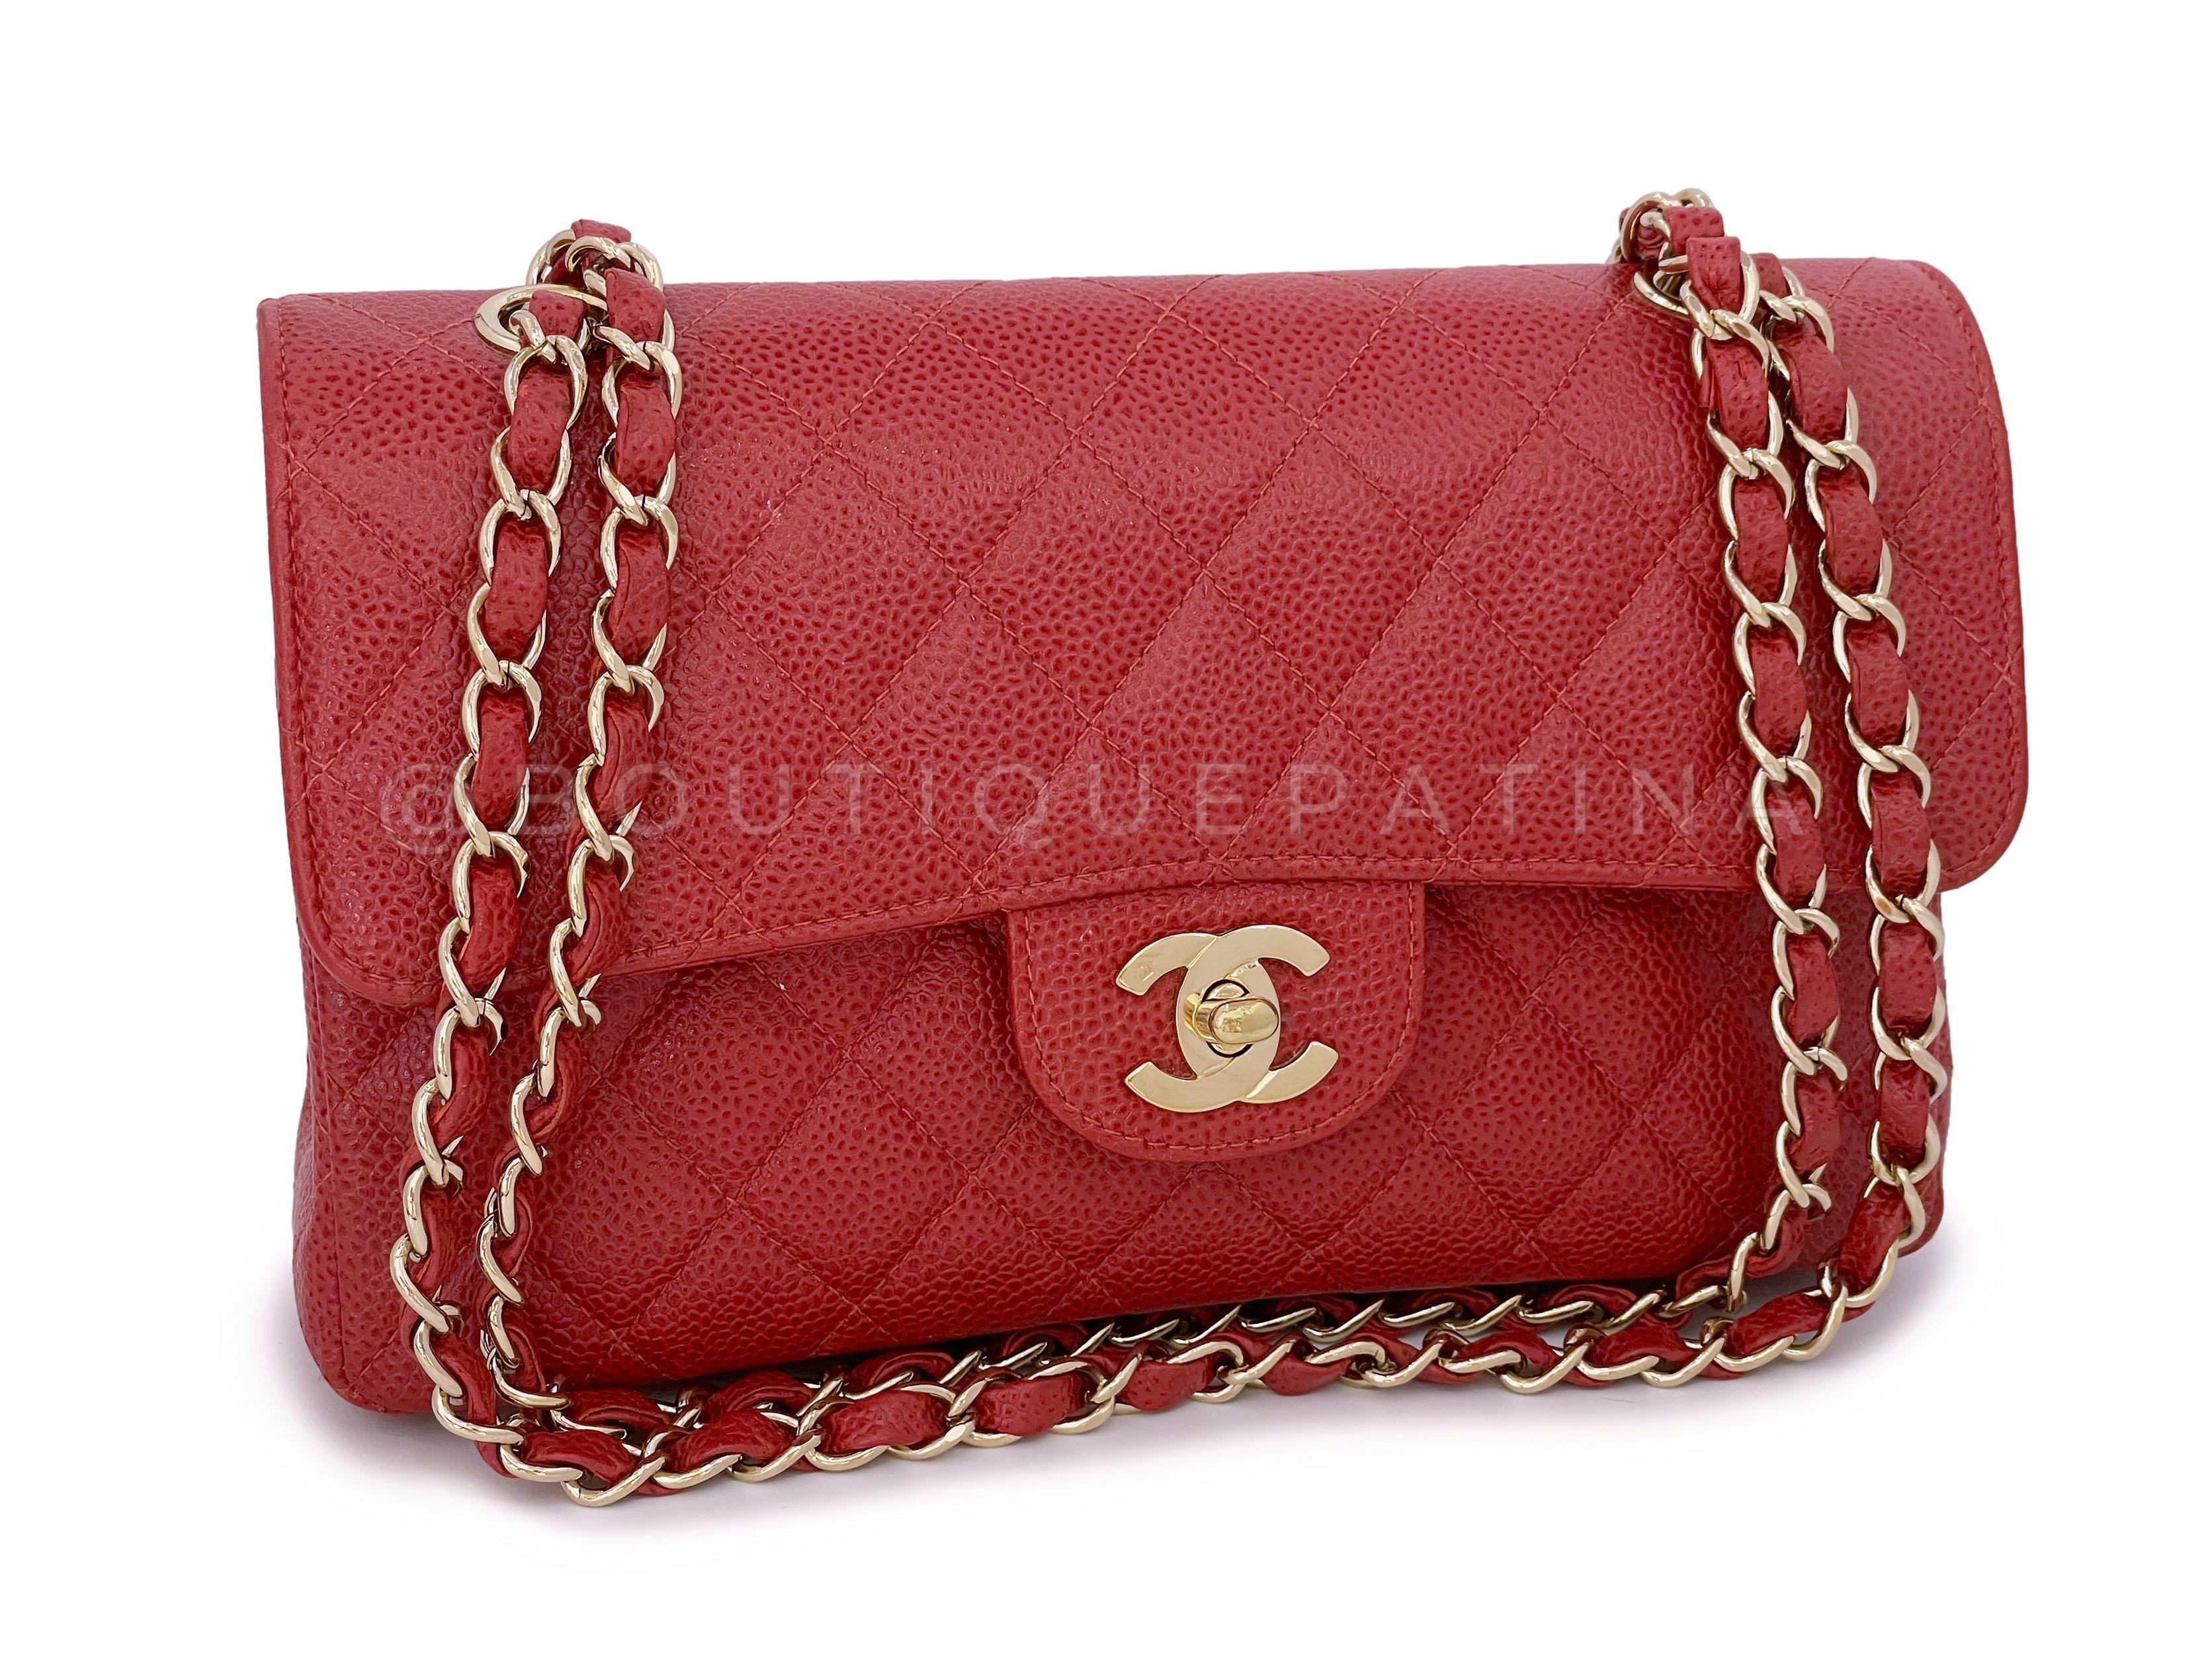 Store item: 66396
Chanel's iconic classic bag is the quilted classic flap. It's left its mark as the quintessential classic Chanel icon with its diamond-quilted panels, the front CC turnlock closure, double woven chain straps and double flap. 

With